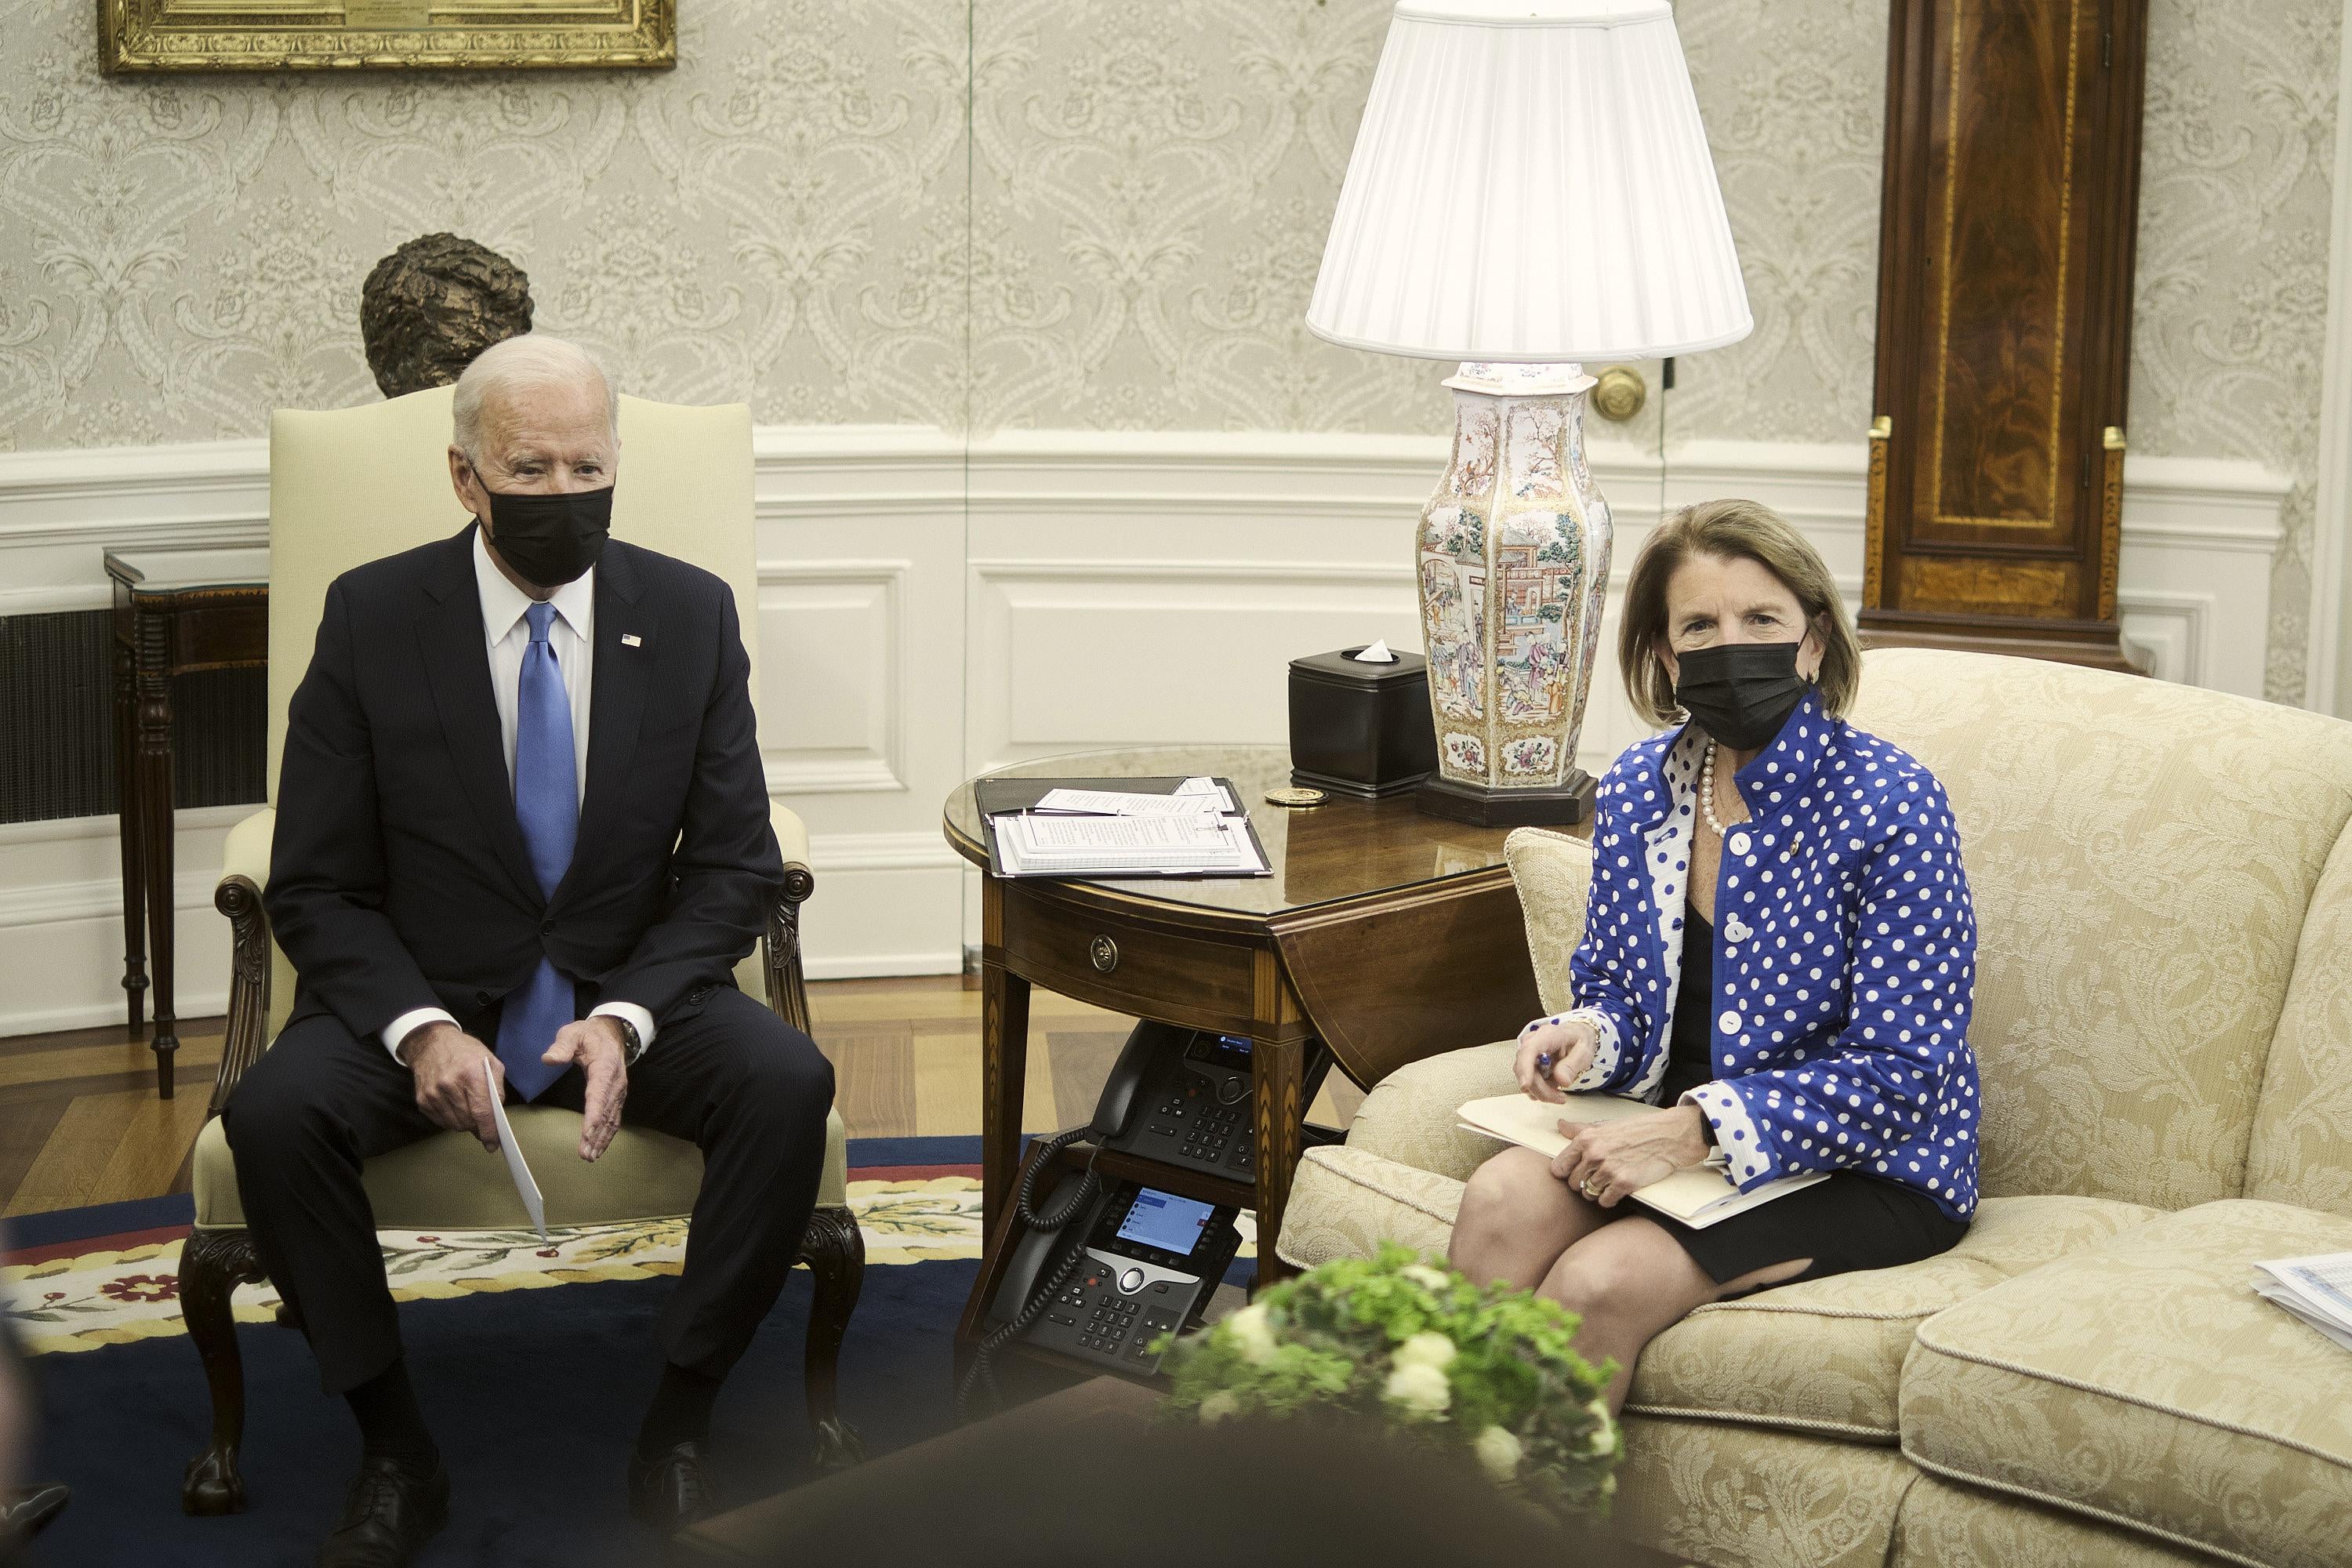 Biden sits in an armchair and Capito on a couch, both wearing black masks, during a meeting